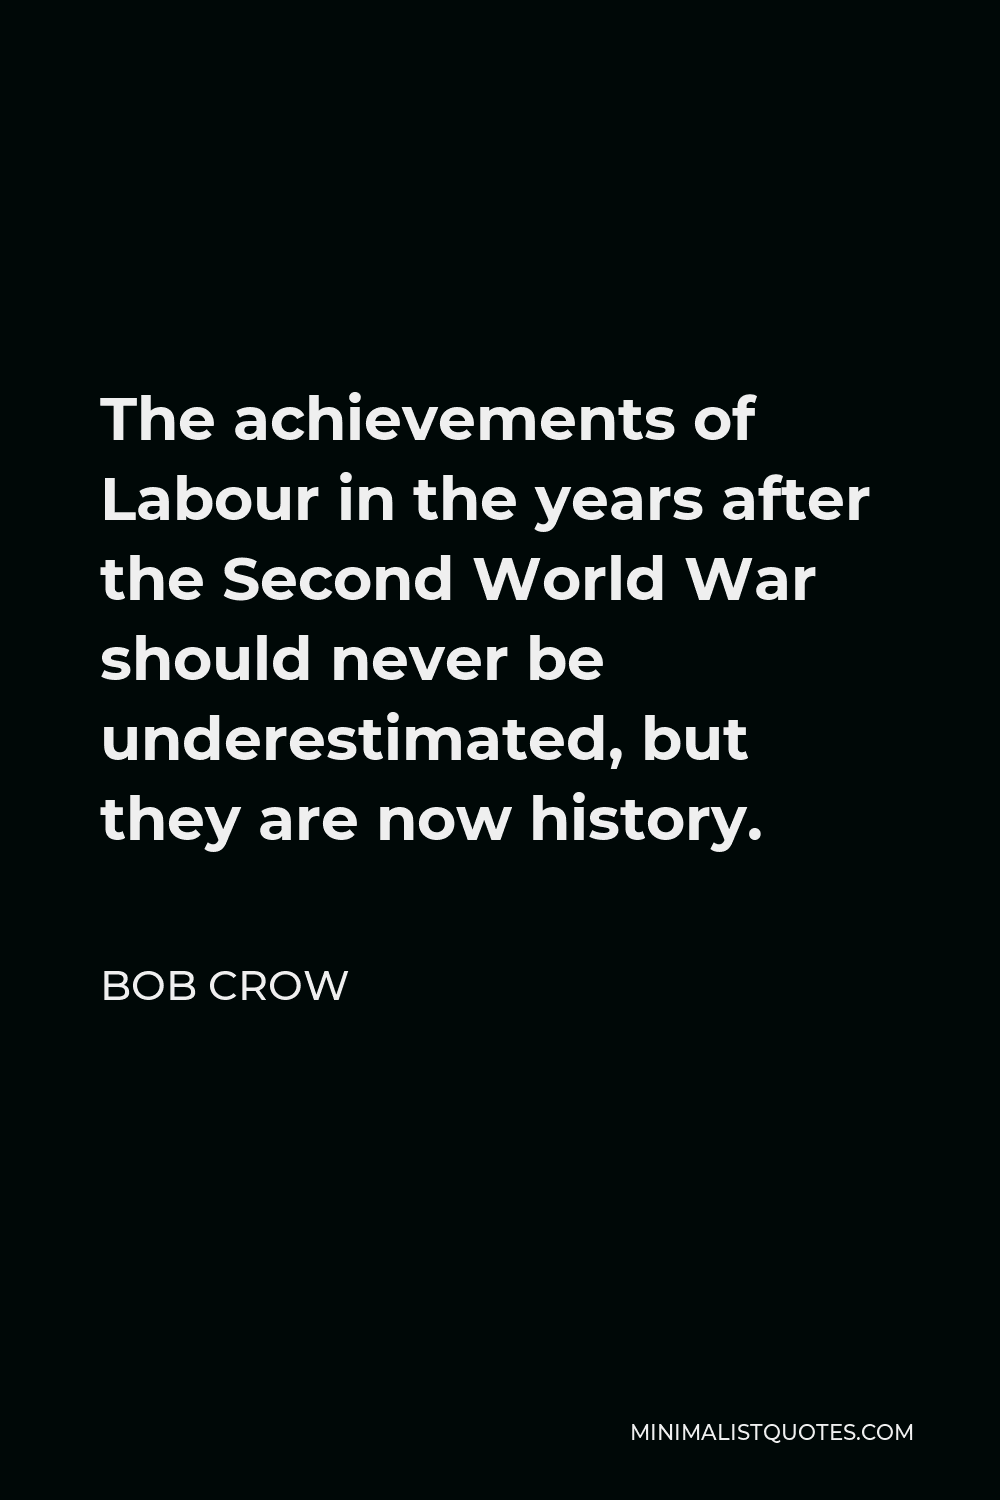 Bob Crow Quote - The achievements of Labour in the years after the Second World War should never be underestimated, but they are now history.